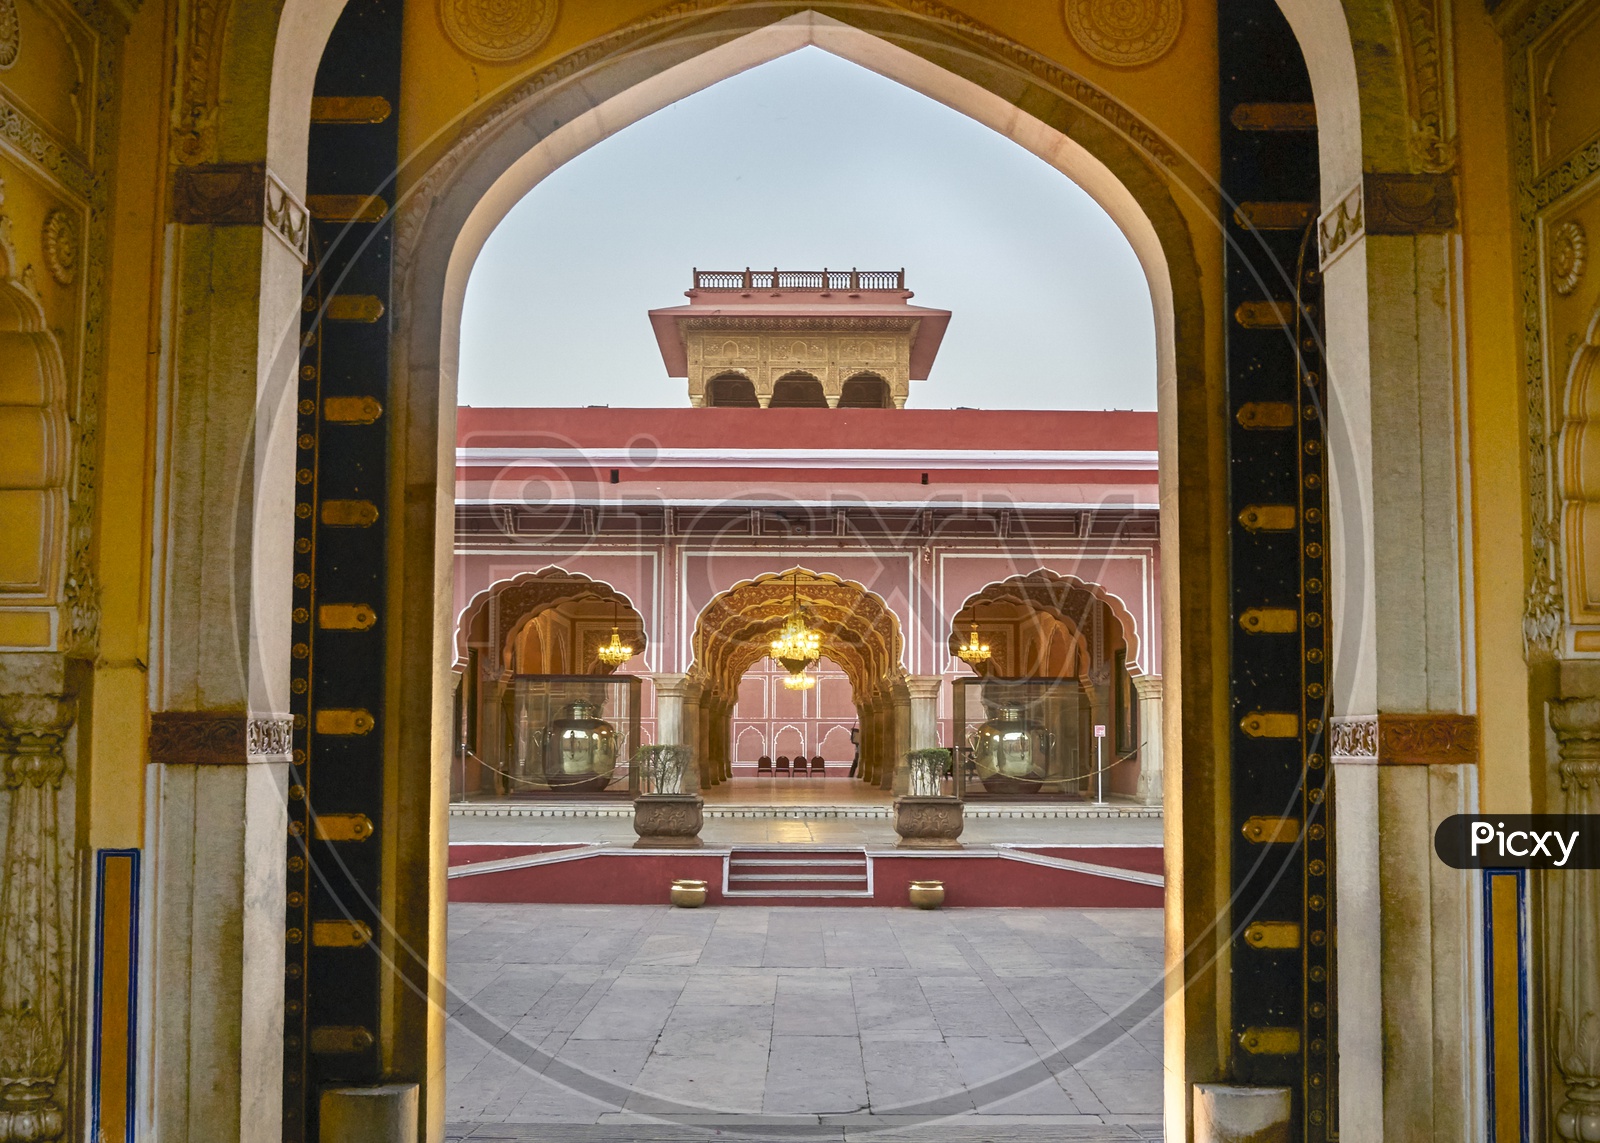 Buildings of the City Palace in Jaipur